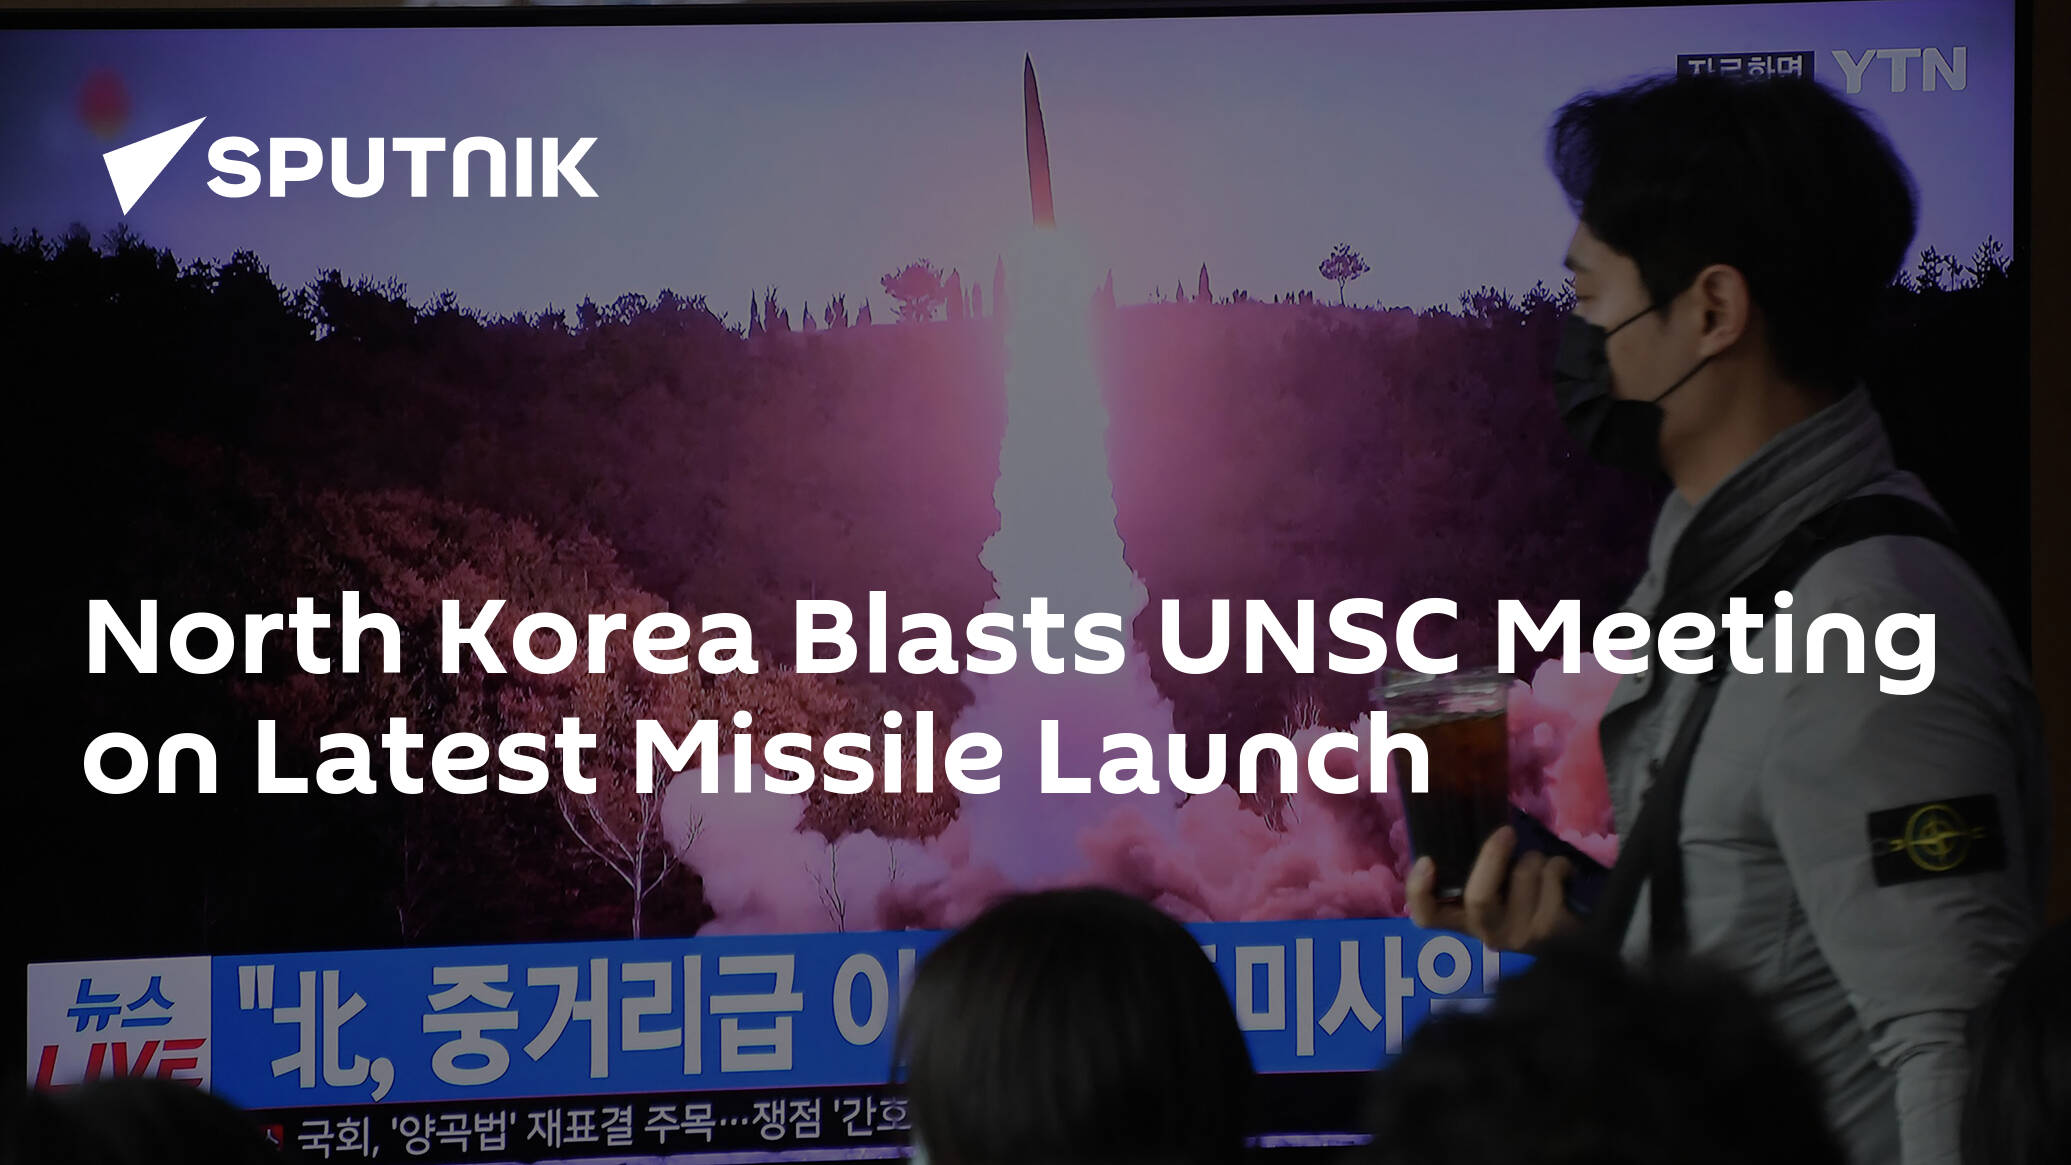 North Korea Blasts UNSC Meeting on Latest Missile Launch